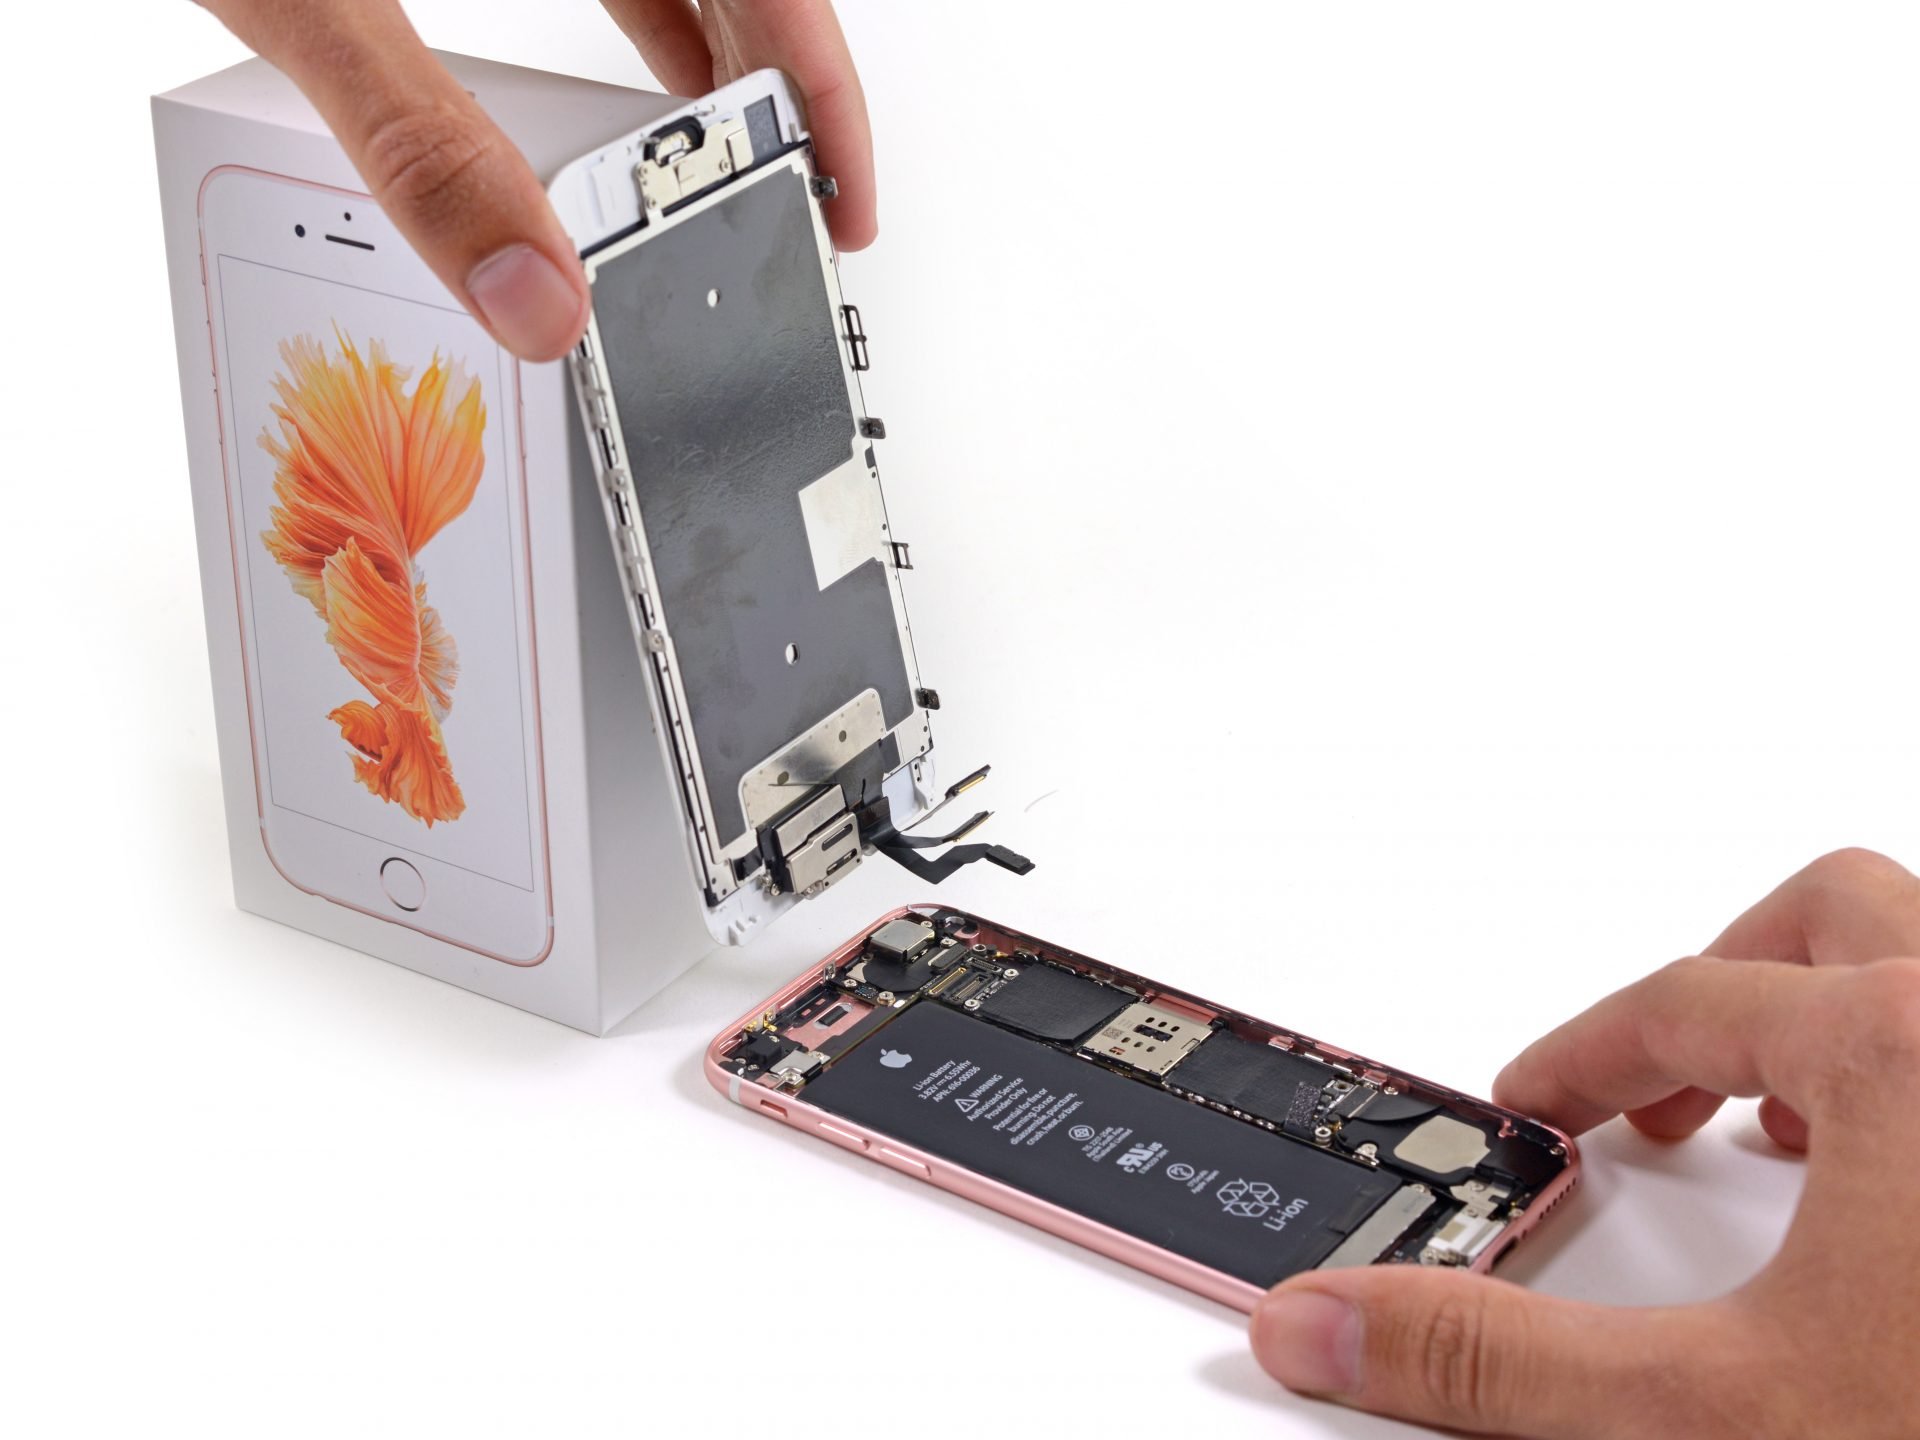 How to Change the Screen of Your iPhone with the Fixxoo DIY Kit